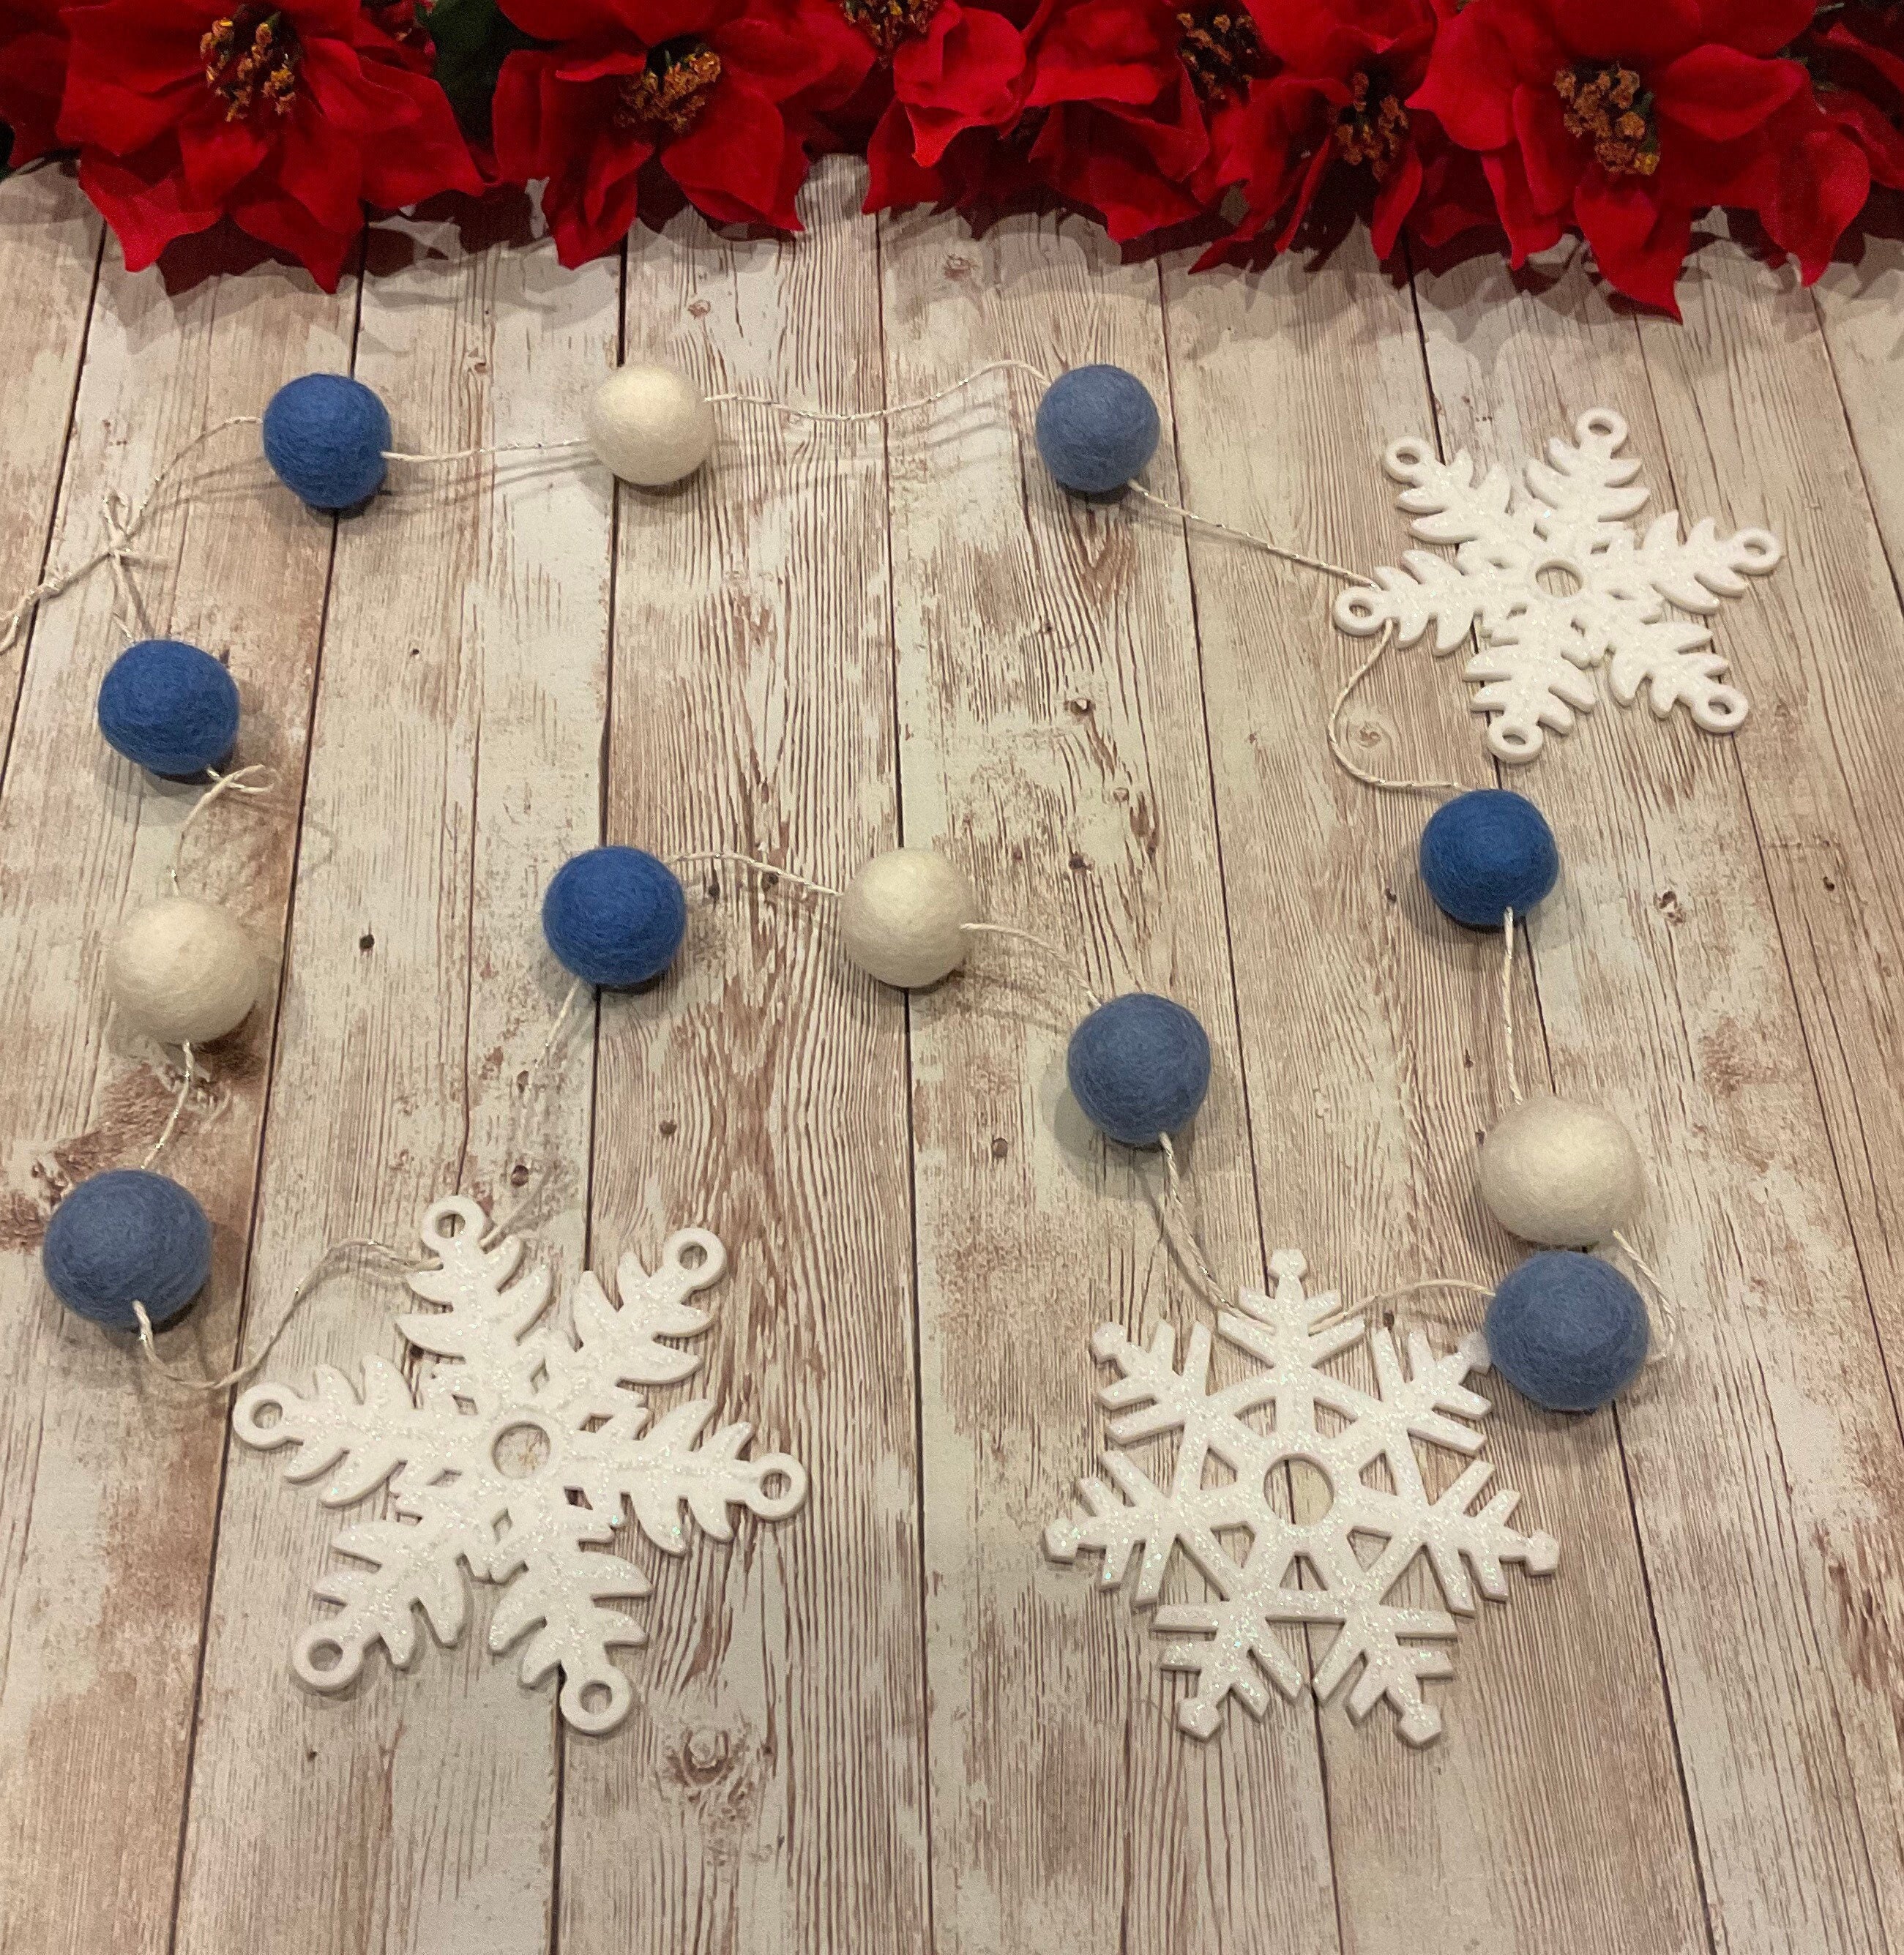 Wool Felt Garland with Snowflakes and Flowers, Light Blue and